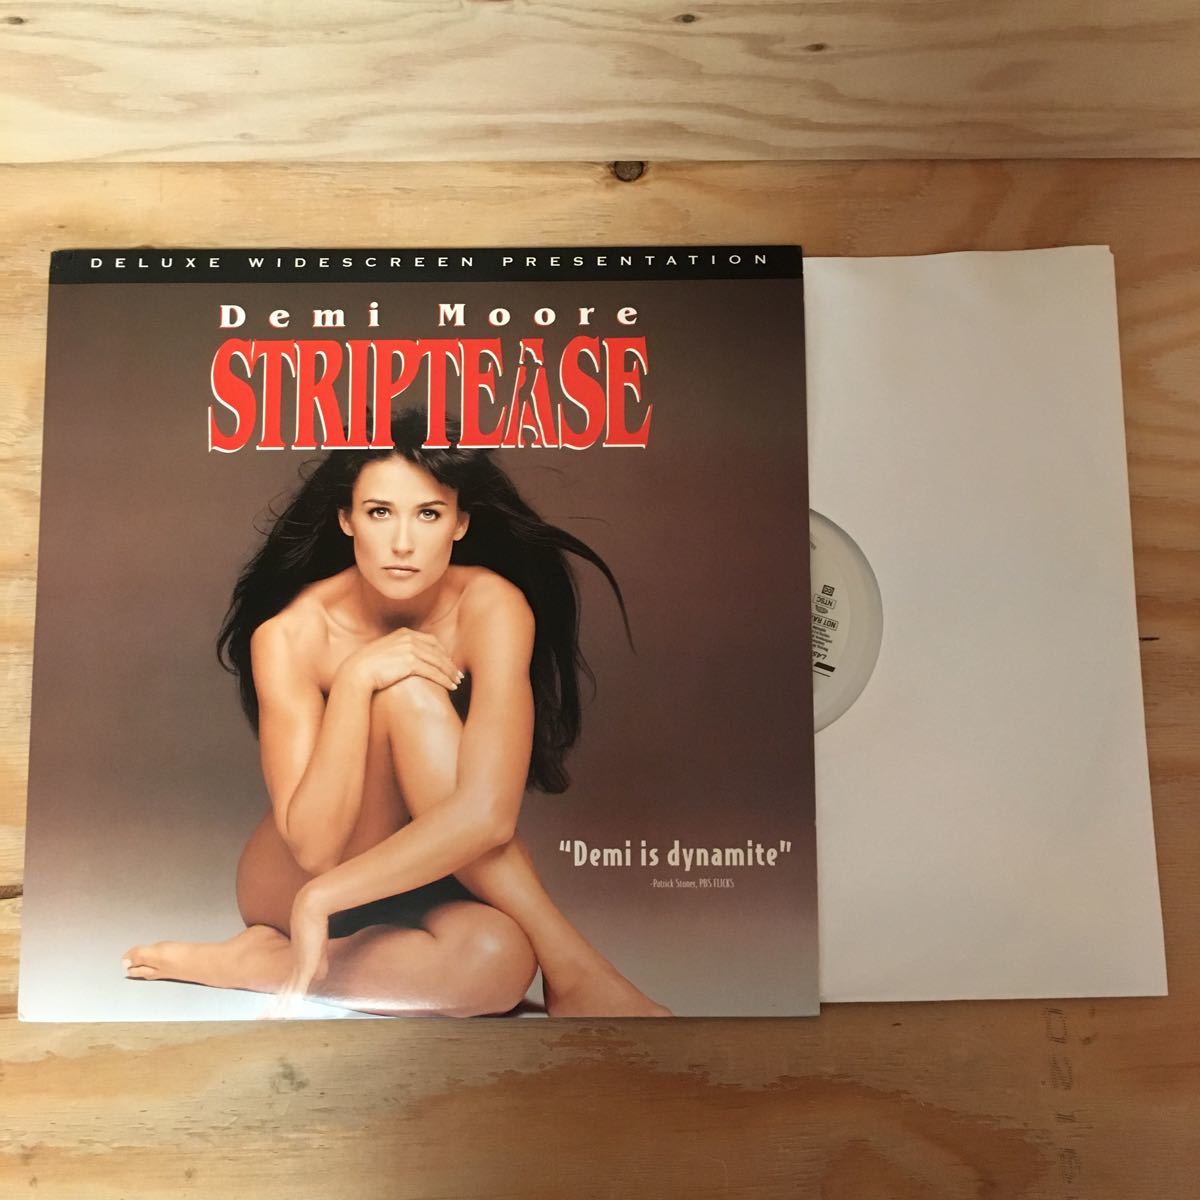 ◎Y3FIID-200305　レア［STRIPTEASE　輸入盤］LD　レーザーディスク　DEMI MOORE　ANDREW BERGMAN_画像4